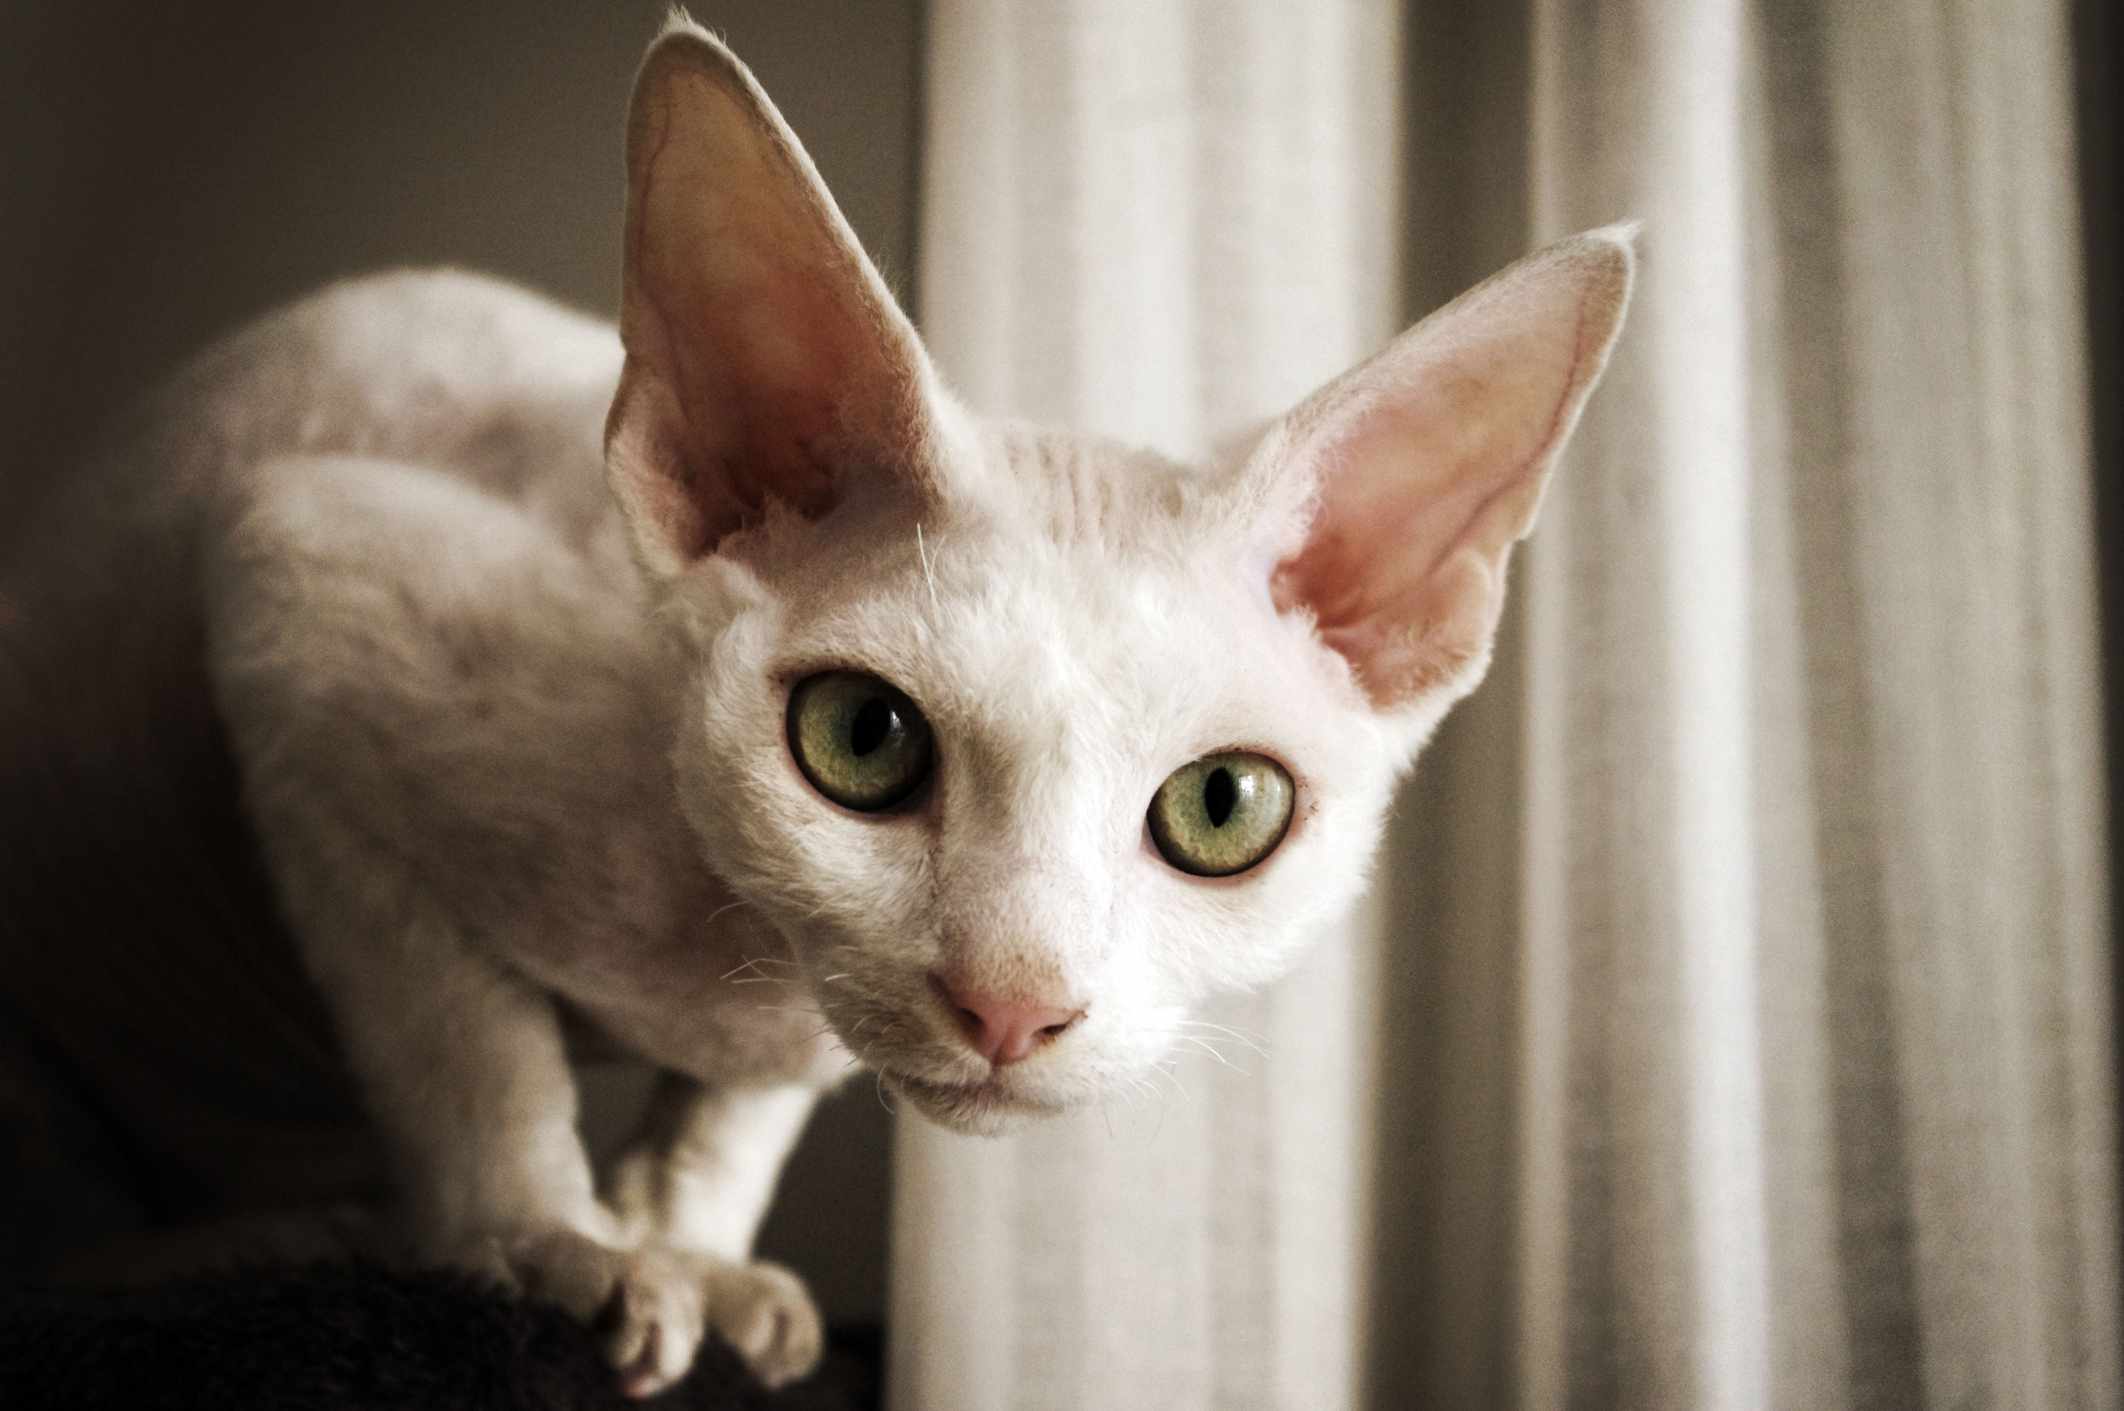 White Devon Rex cat looking directly into camera.